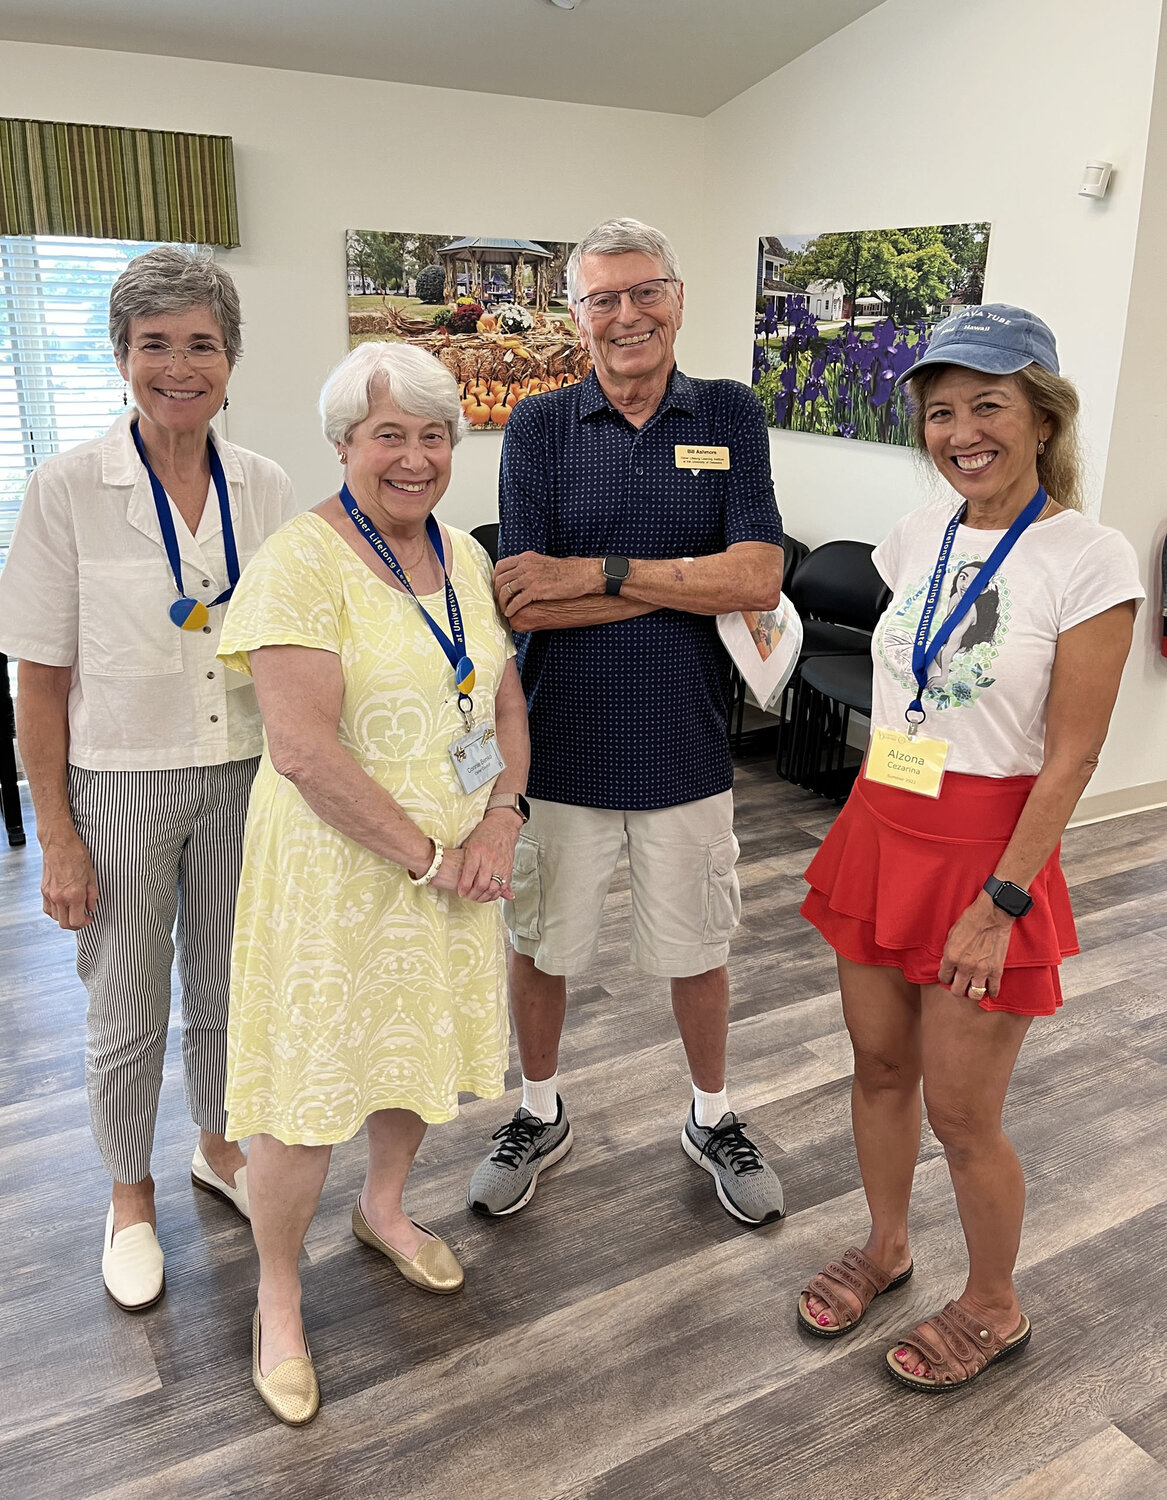 The University of Delaware’s Osher Lifelong Learning program in Dover, Lewes, Ocean View and Wilmington are hosting open house events Jan. 8-11. From left, volunteers and staff from the Lewes and Ocean View programs Trish Dennison, Connie Benko, Bill Ashmore and Cezarina Alzona.